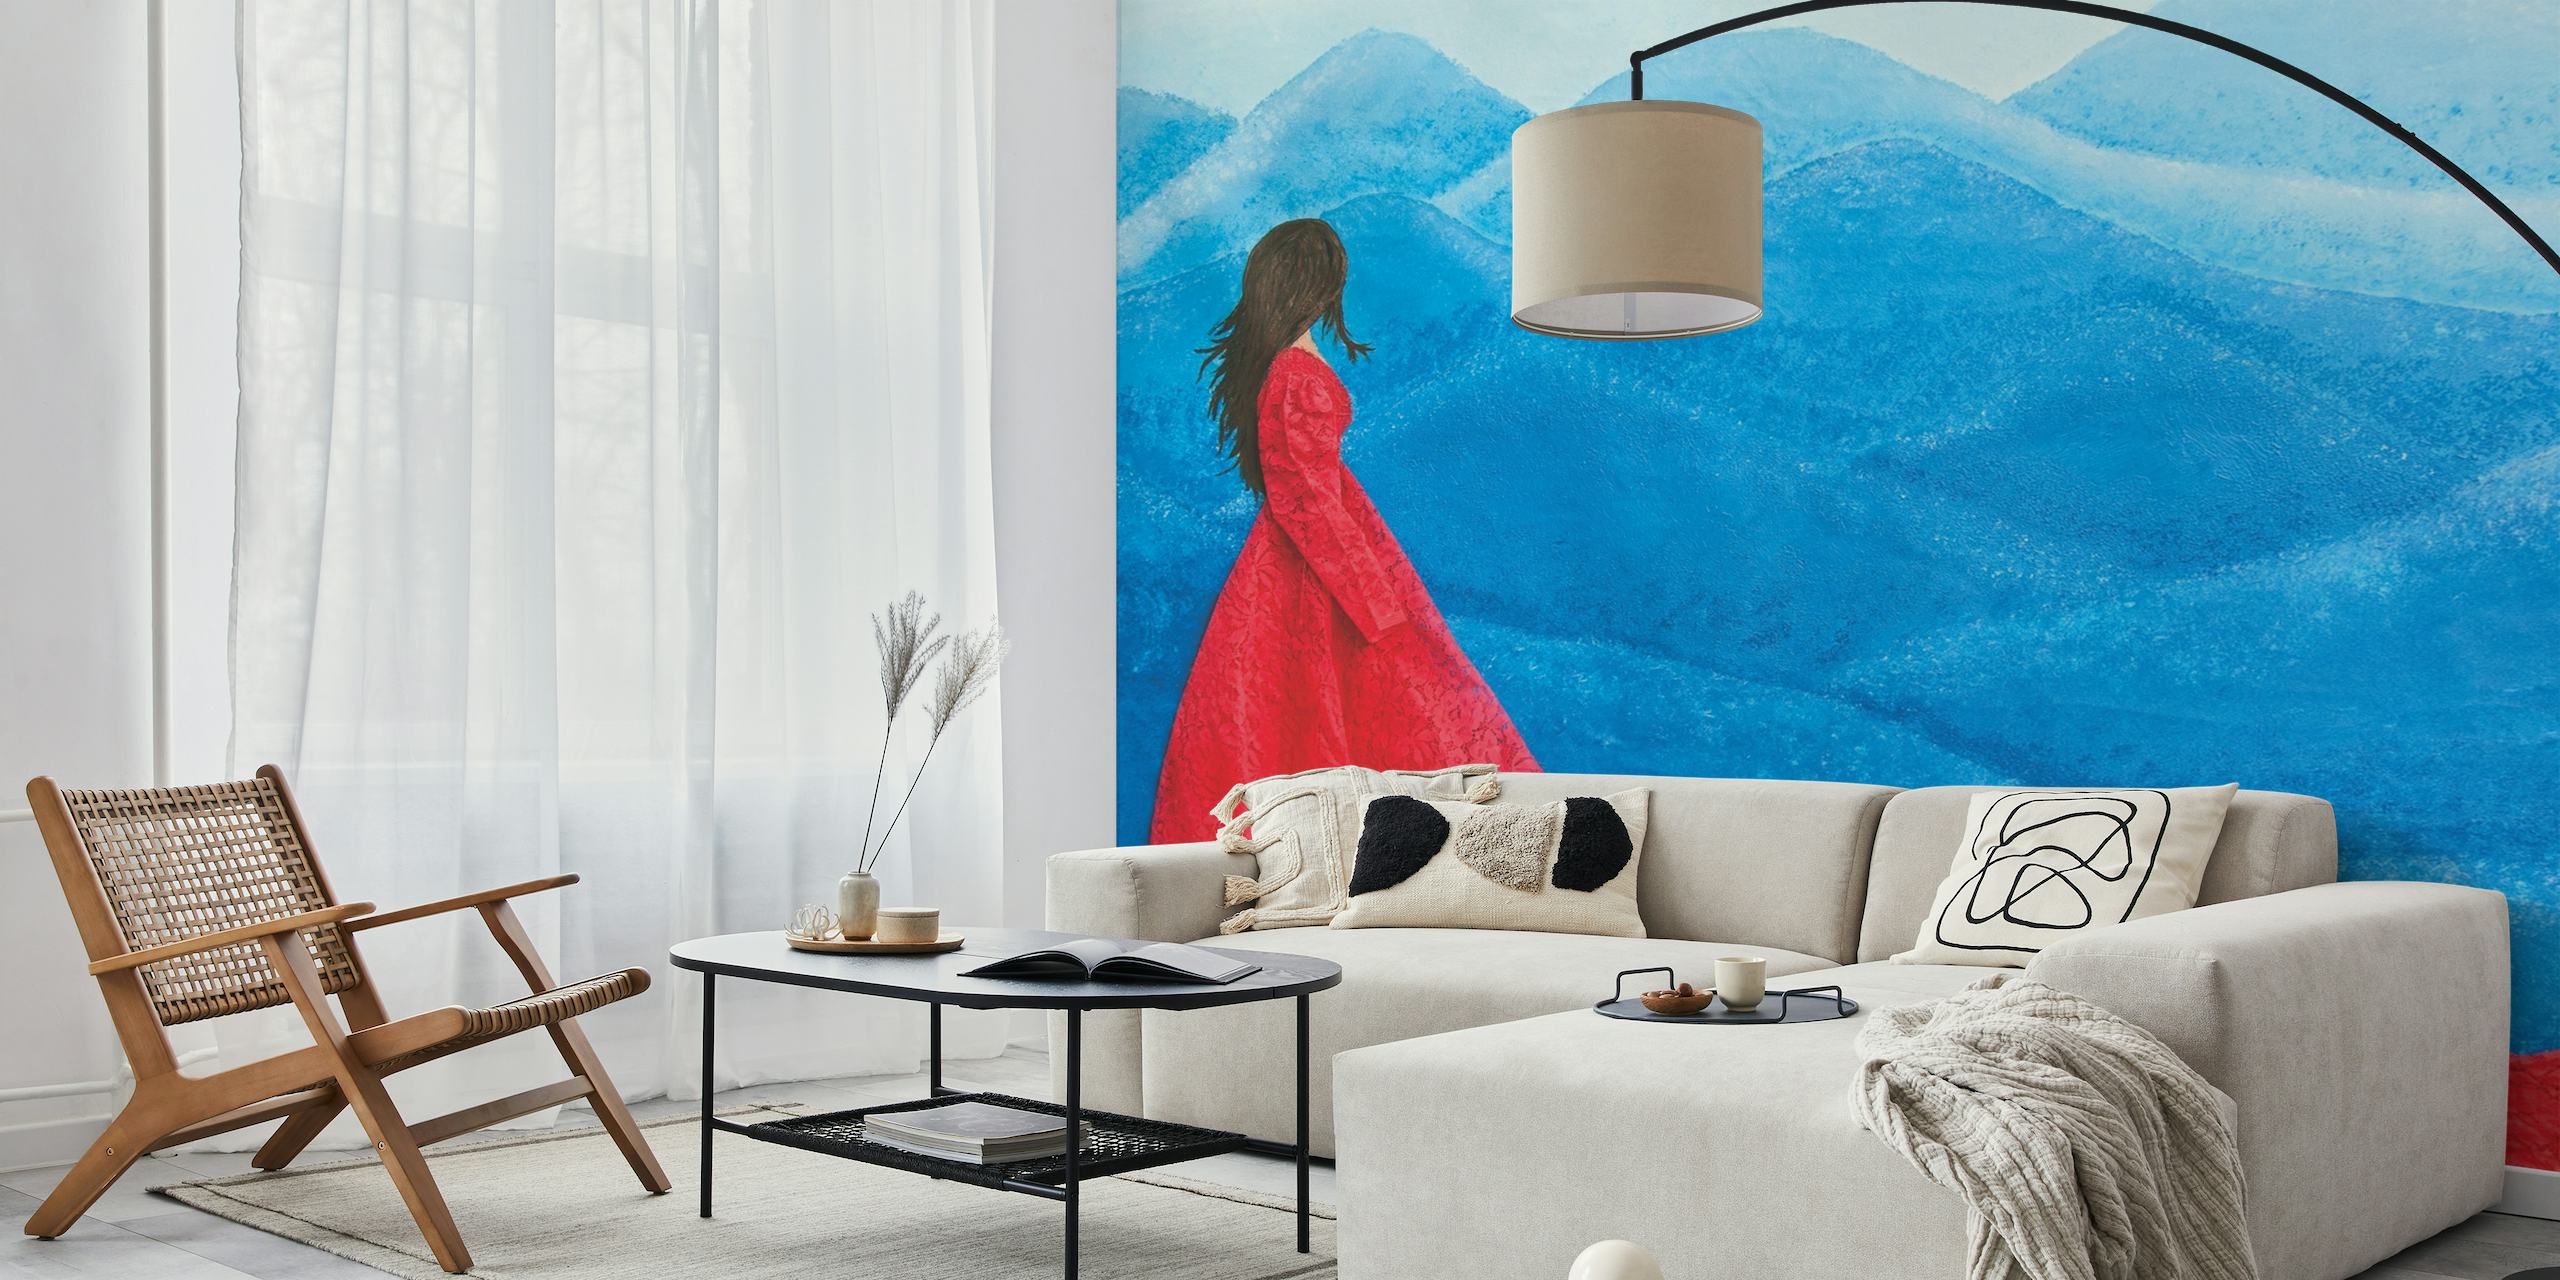 Elegant figure in red gown against abstract blue waves wall mural